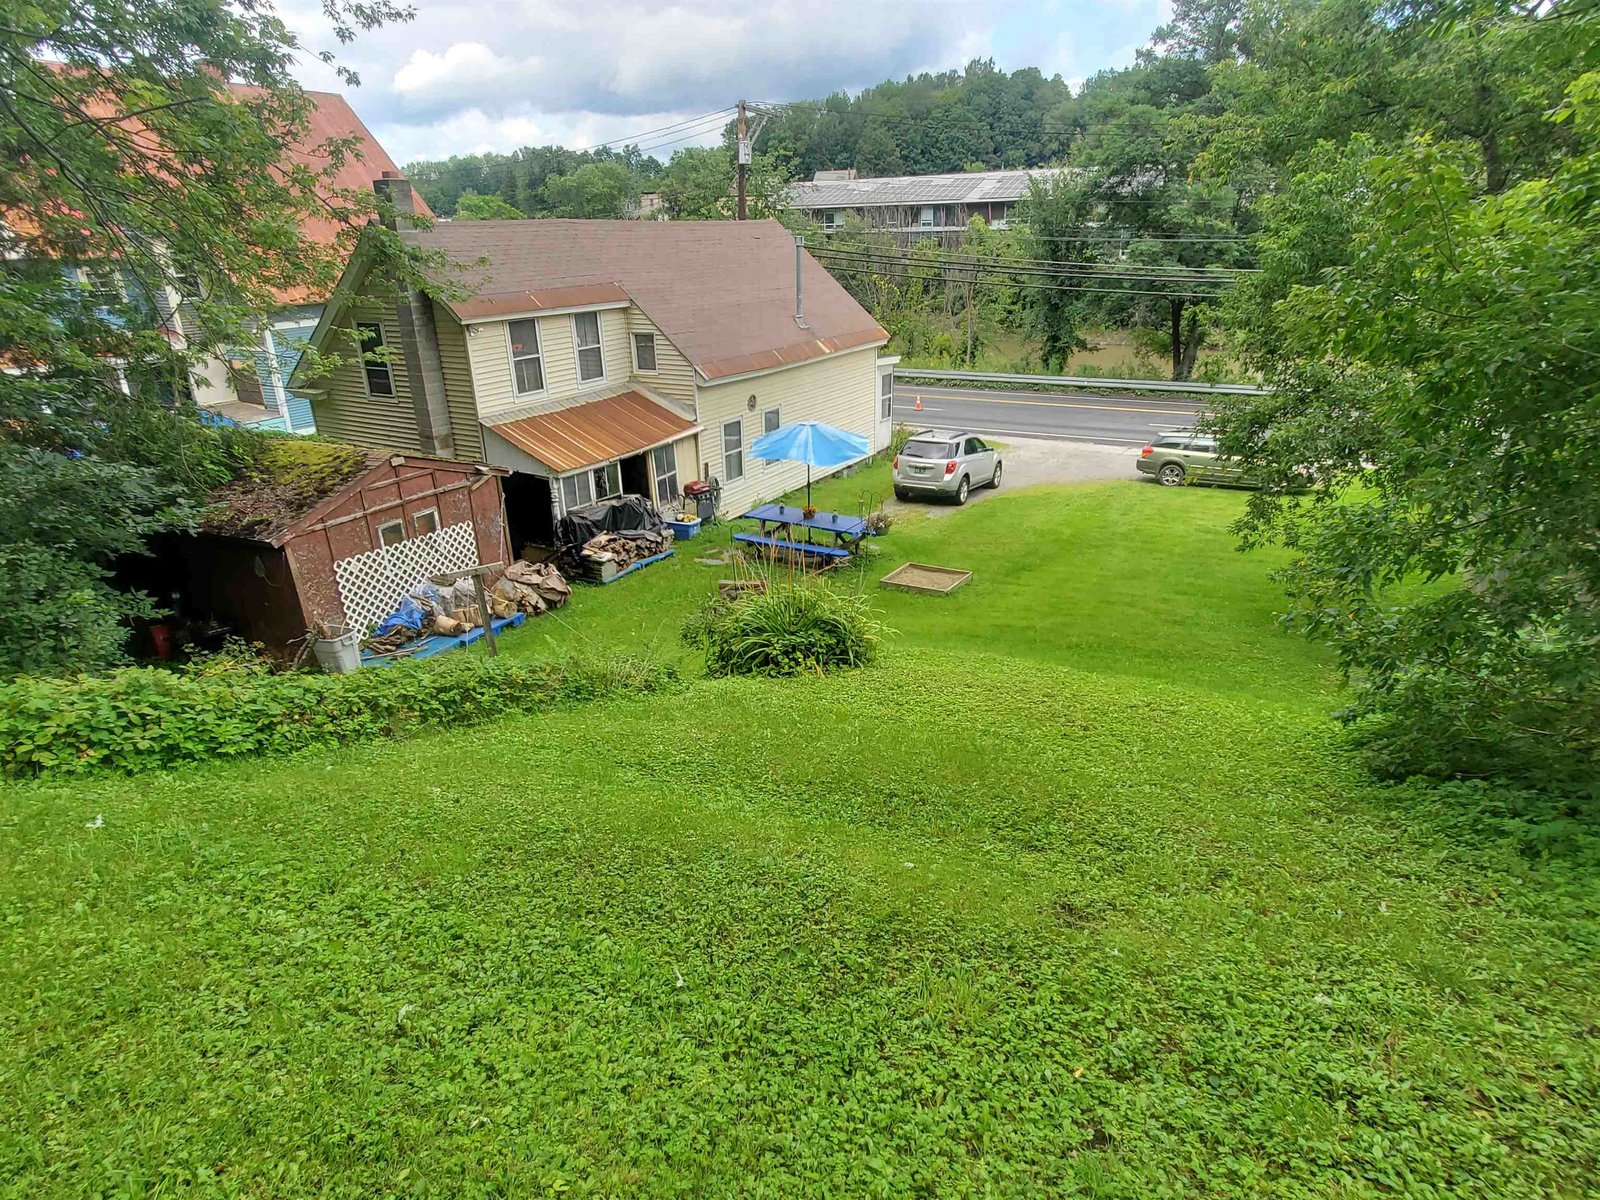 View from top of yard